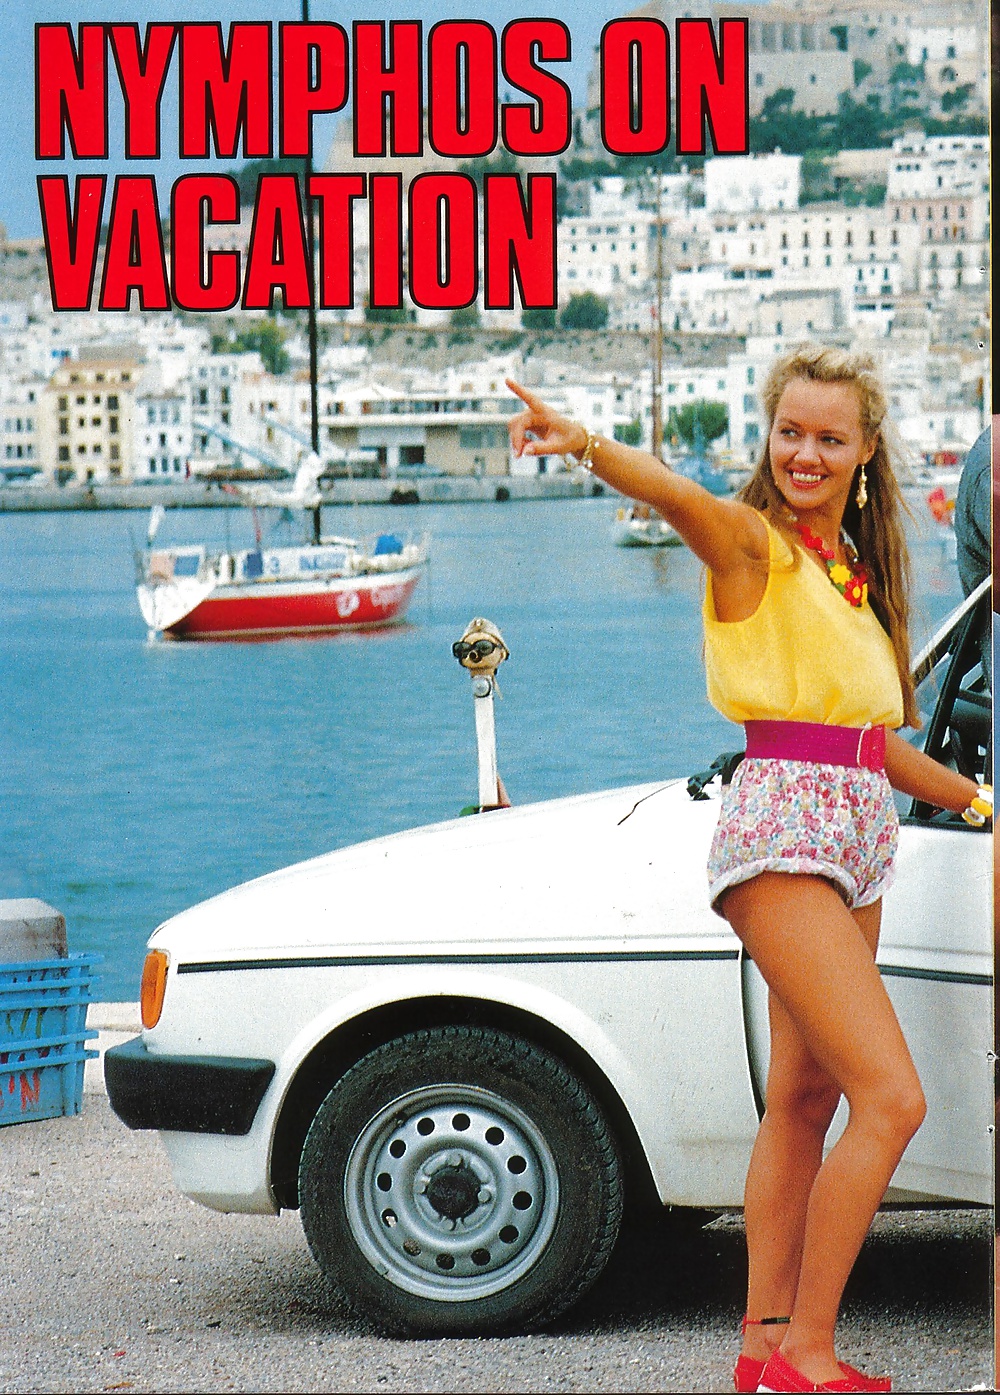 Classic magazine #42 - nympos on vacation #31051511